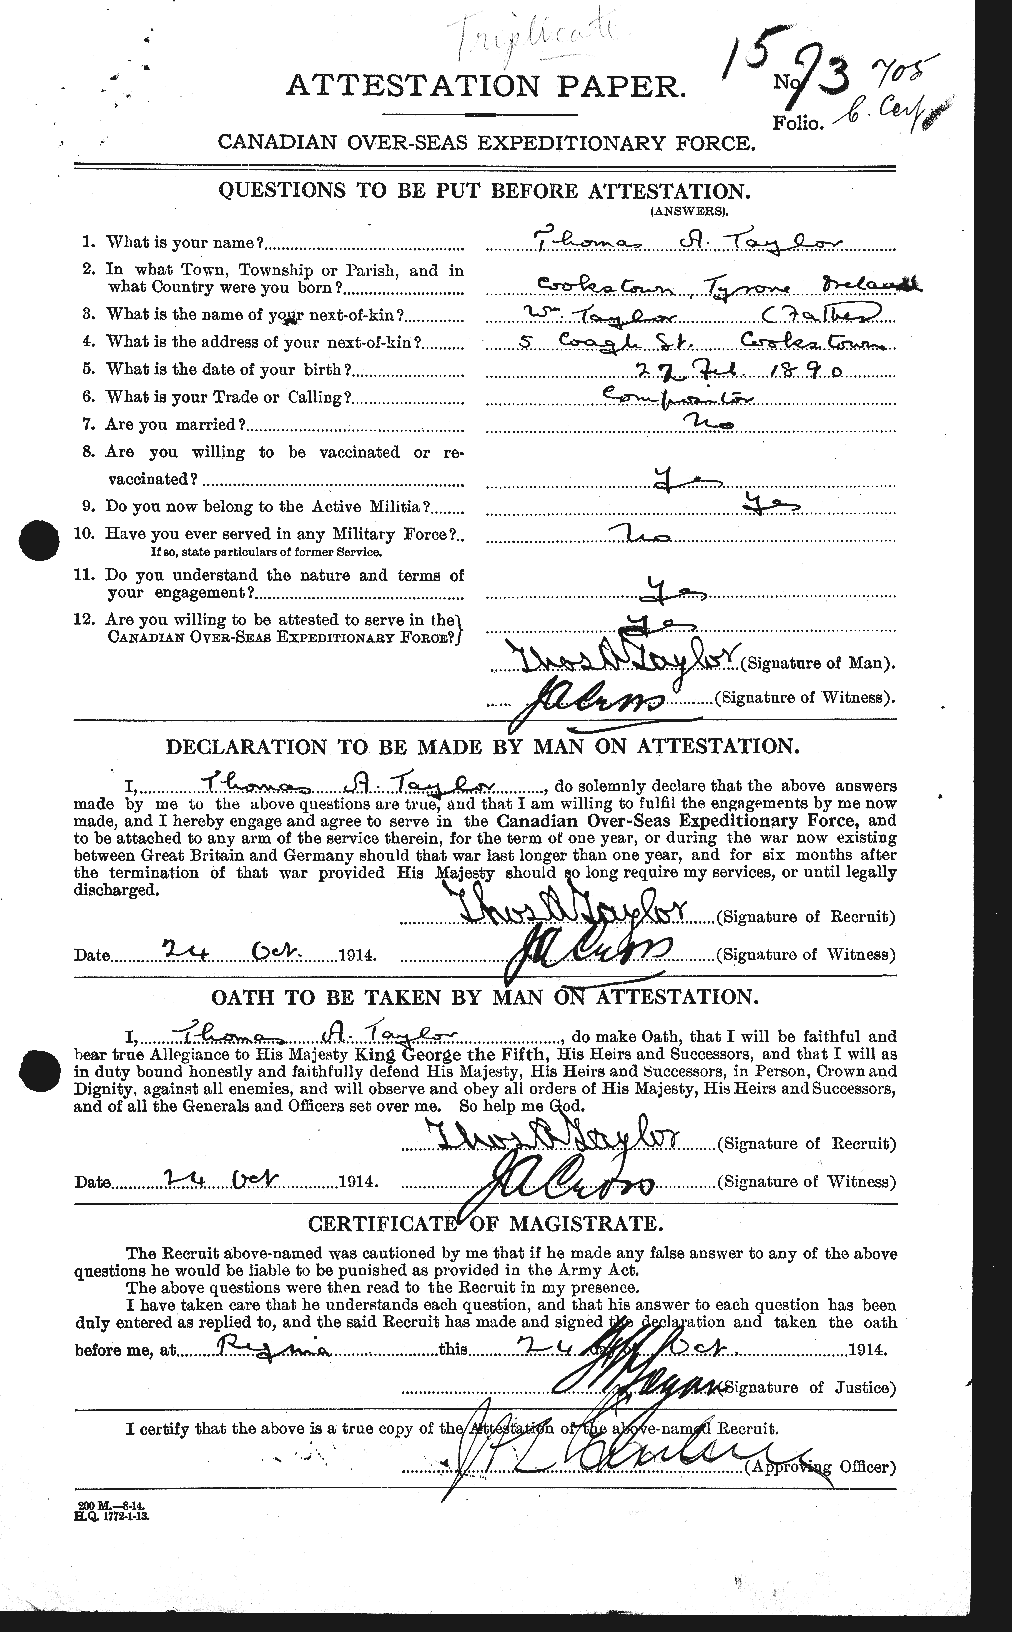 Personnel Records of the First World War - CEF 627966a